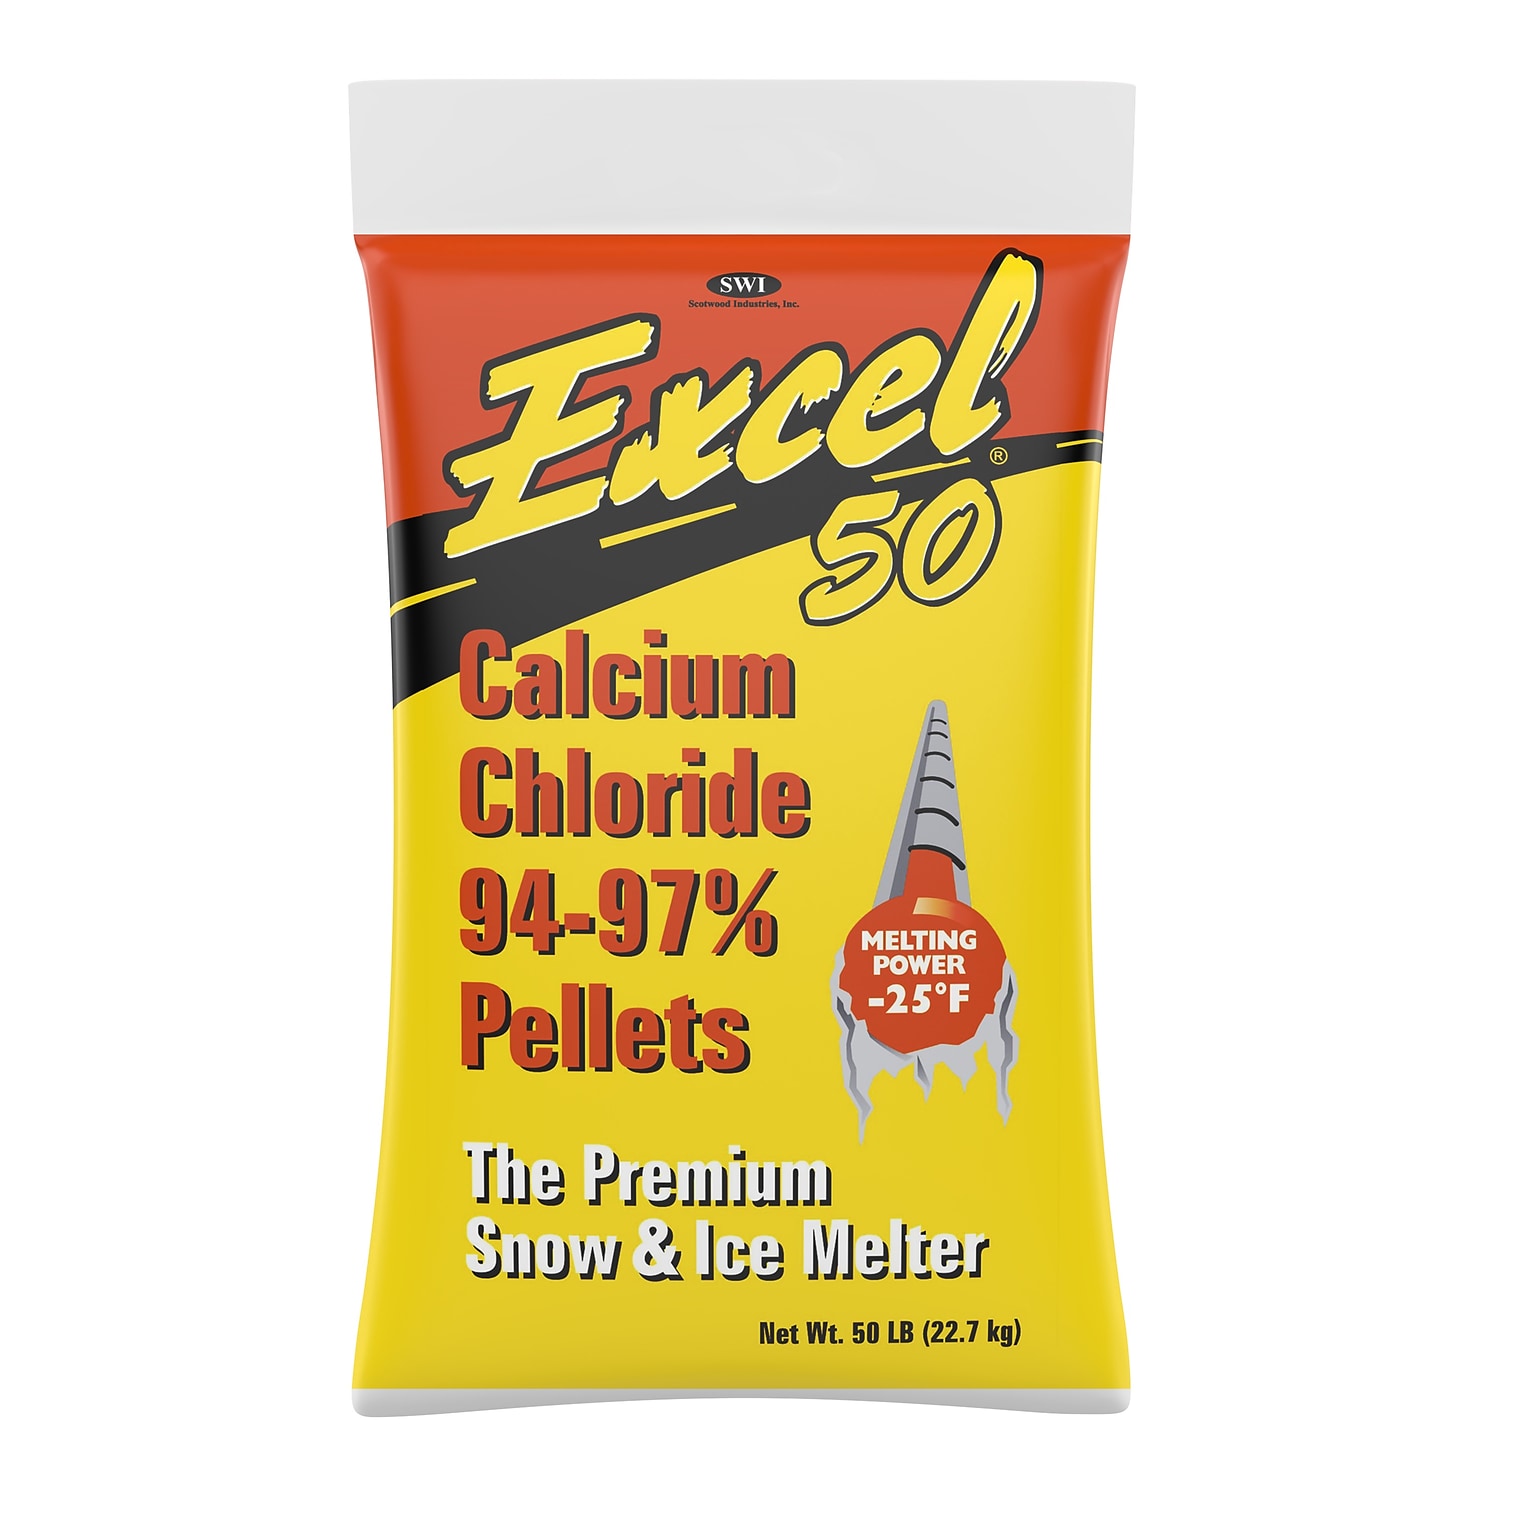 Scotwood Industries Excel Calcium Chloride Pellets Ice Melt, Melts to -25 Degrees, 50 lbs. Bag (50BWTR/EXL/HEAT)